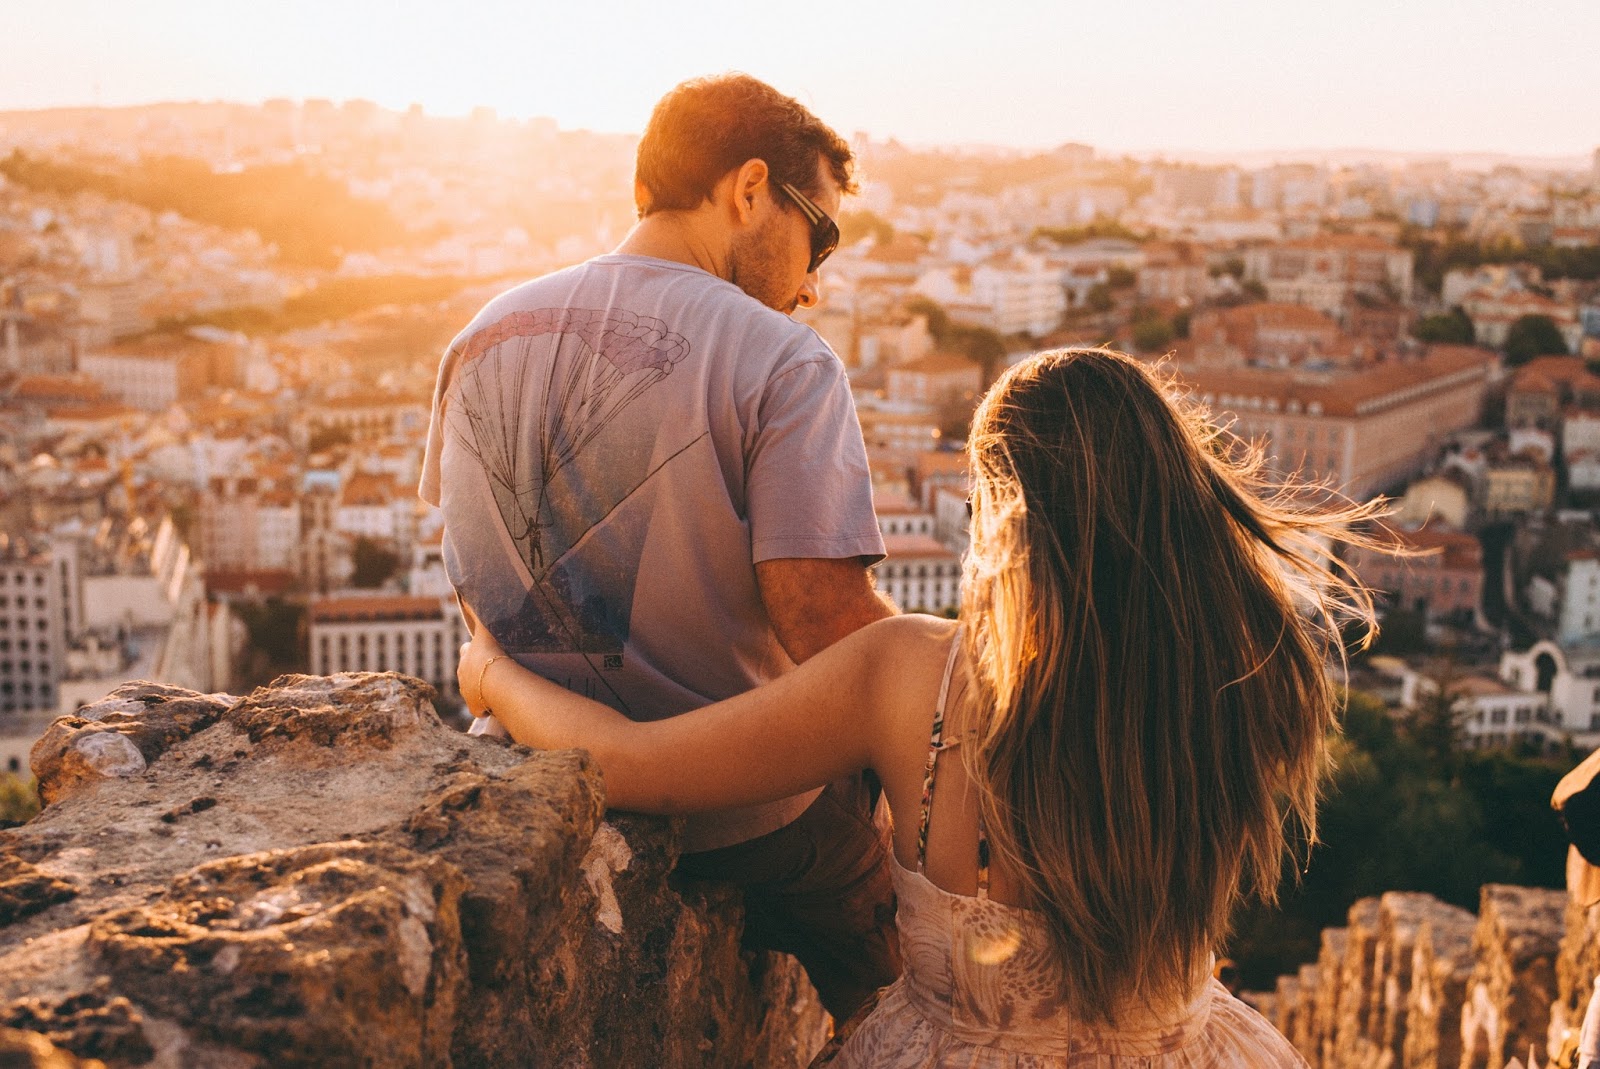 Man and woman gazing over a town below from a high vantage point